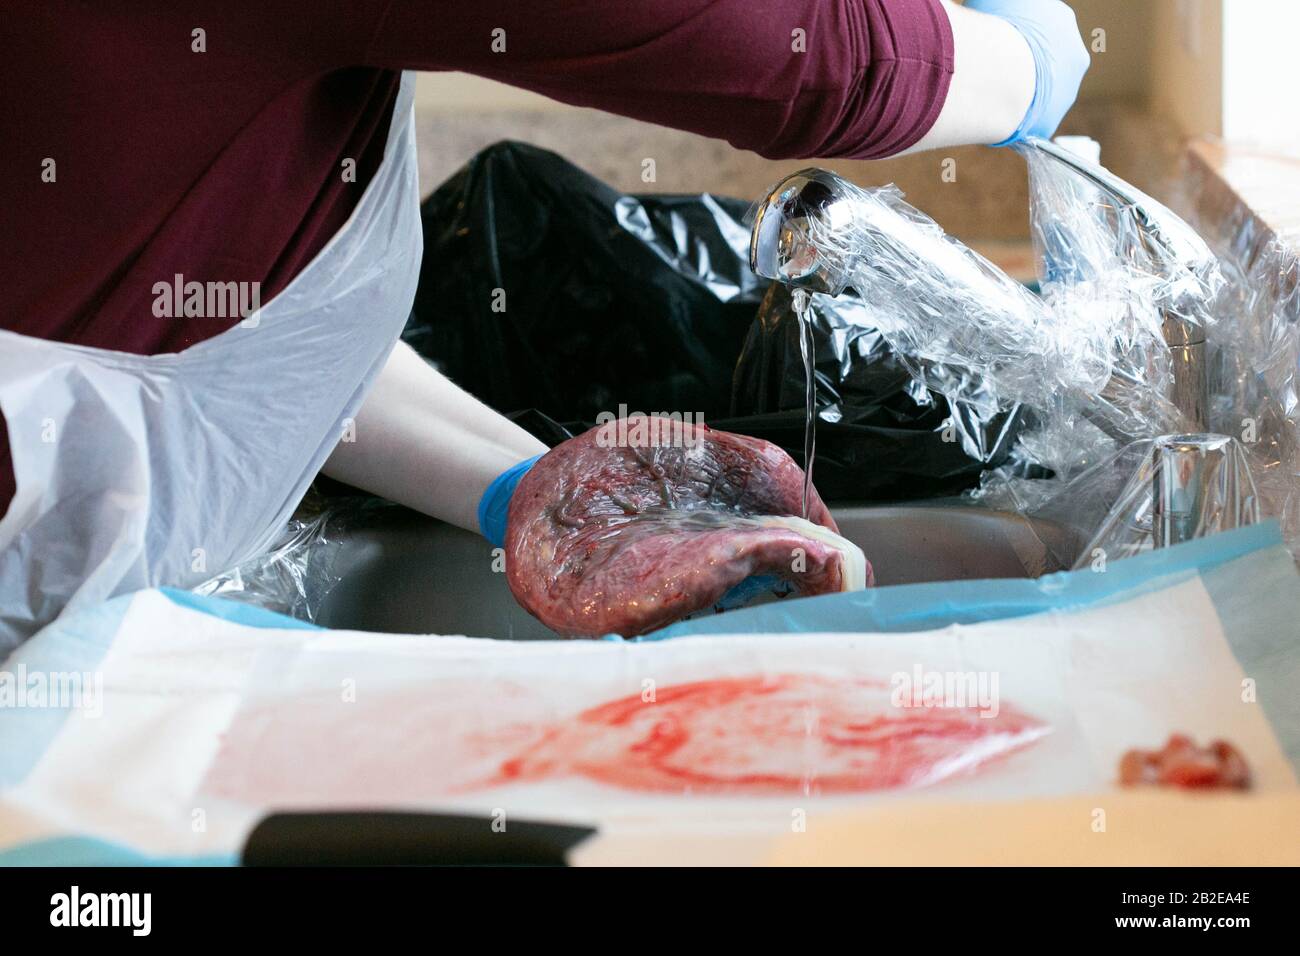 Gloved hands rinsing placenta in sink. Stock Photo